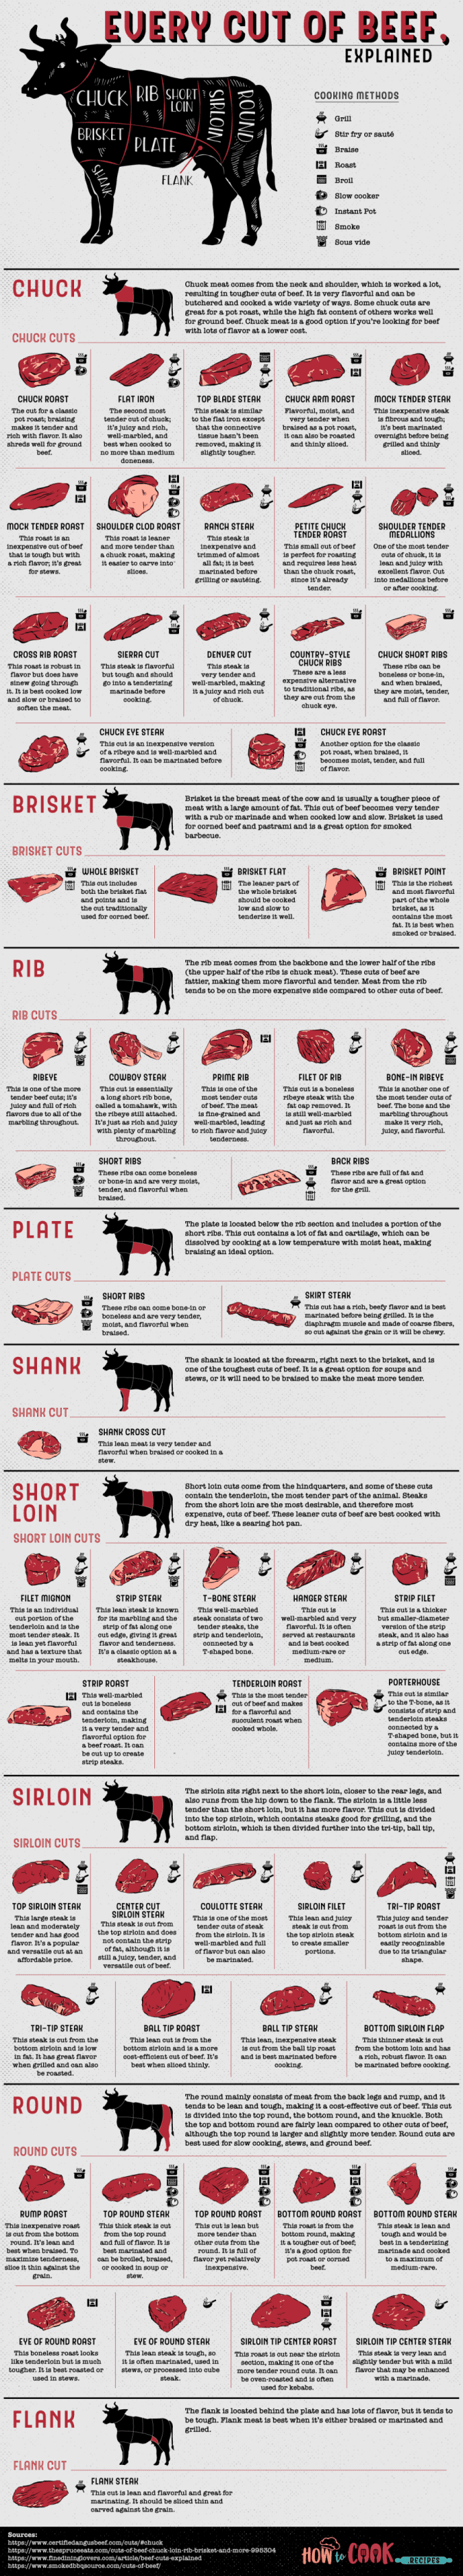 Complete-Guide-U.S. Cuts of Beef-Infographic